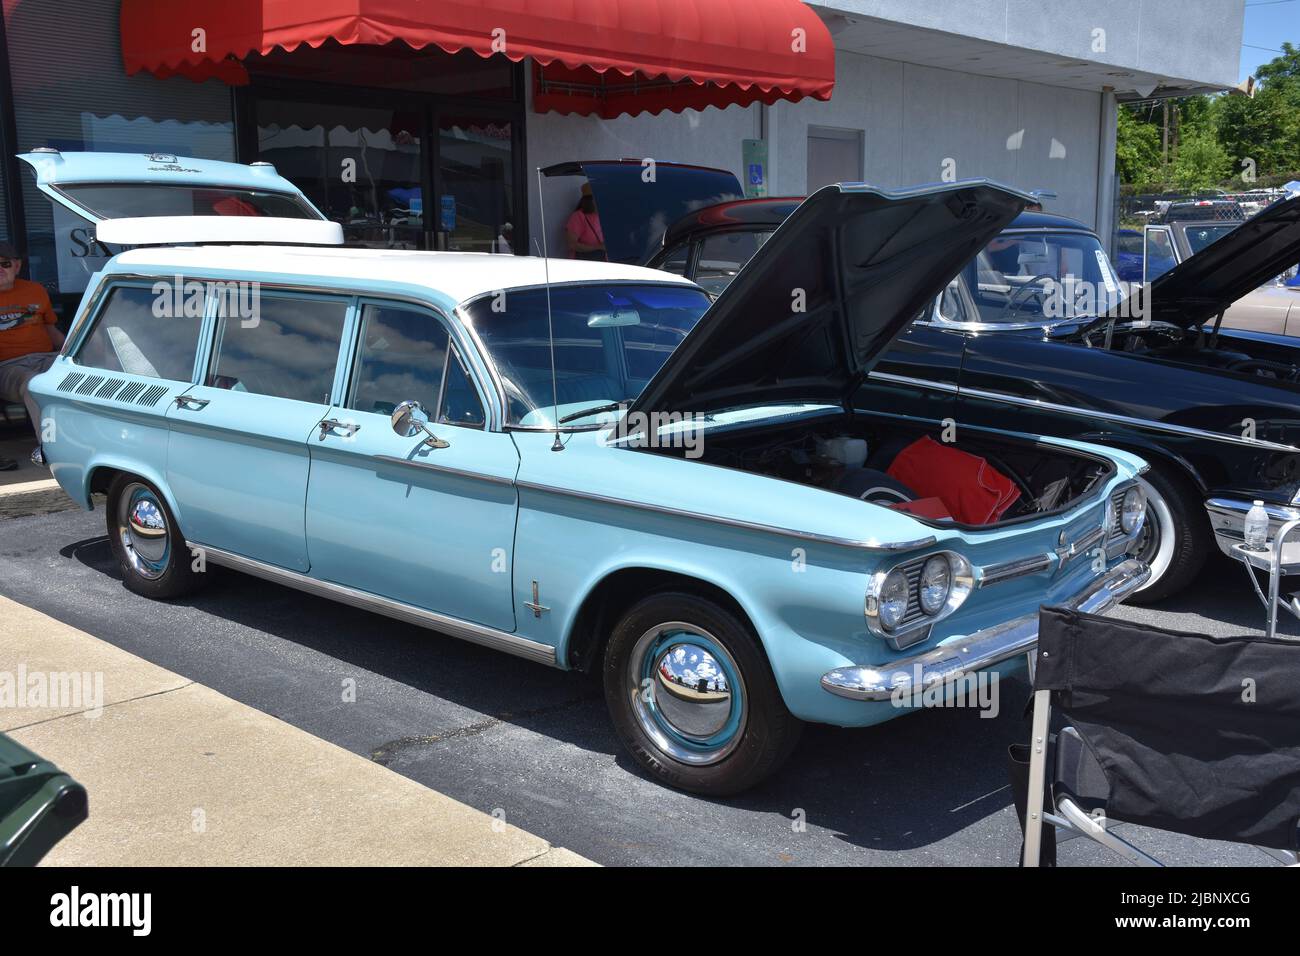 A Chevrolet Corvair Monza Station Wagon on display at a car show. Stock Photo